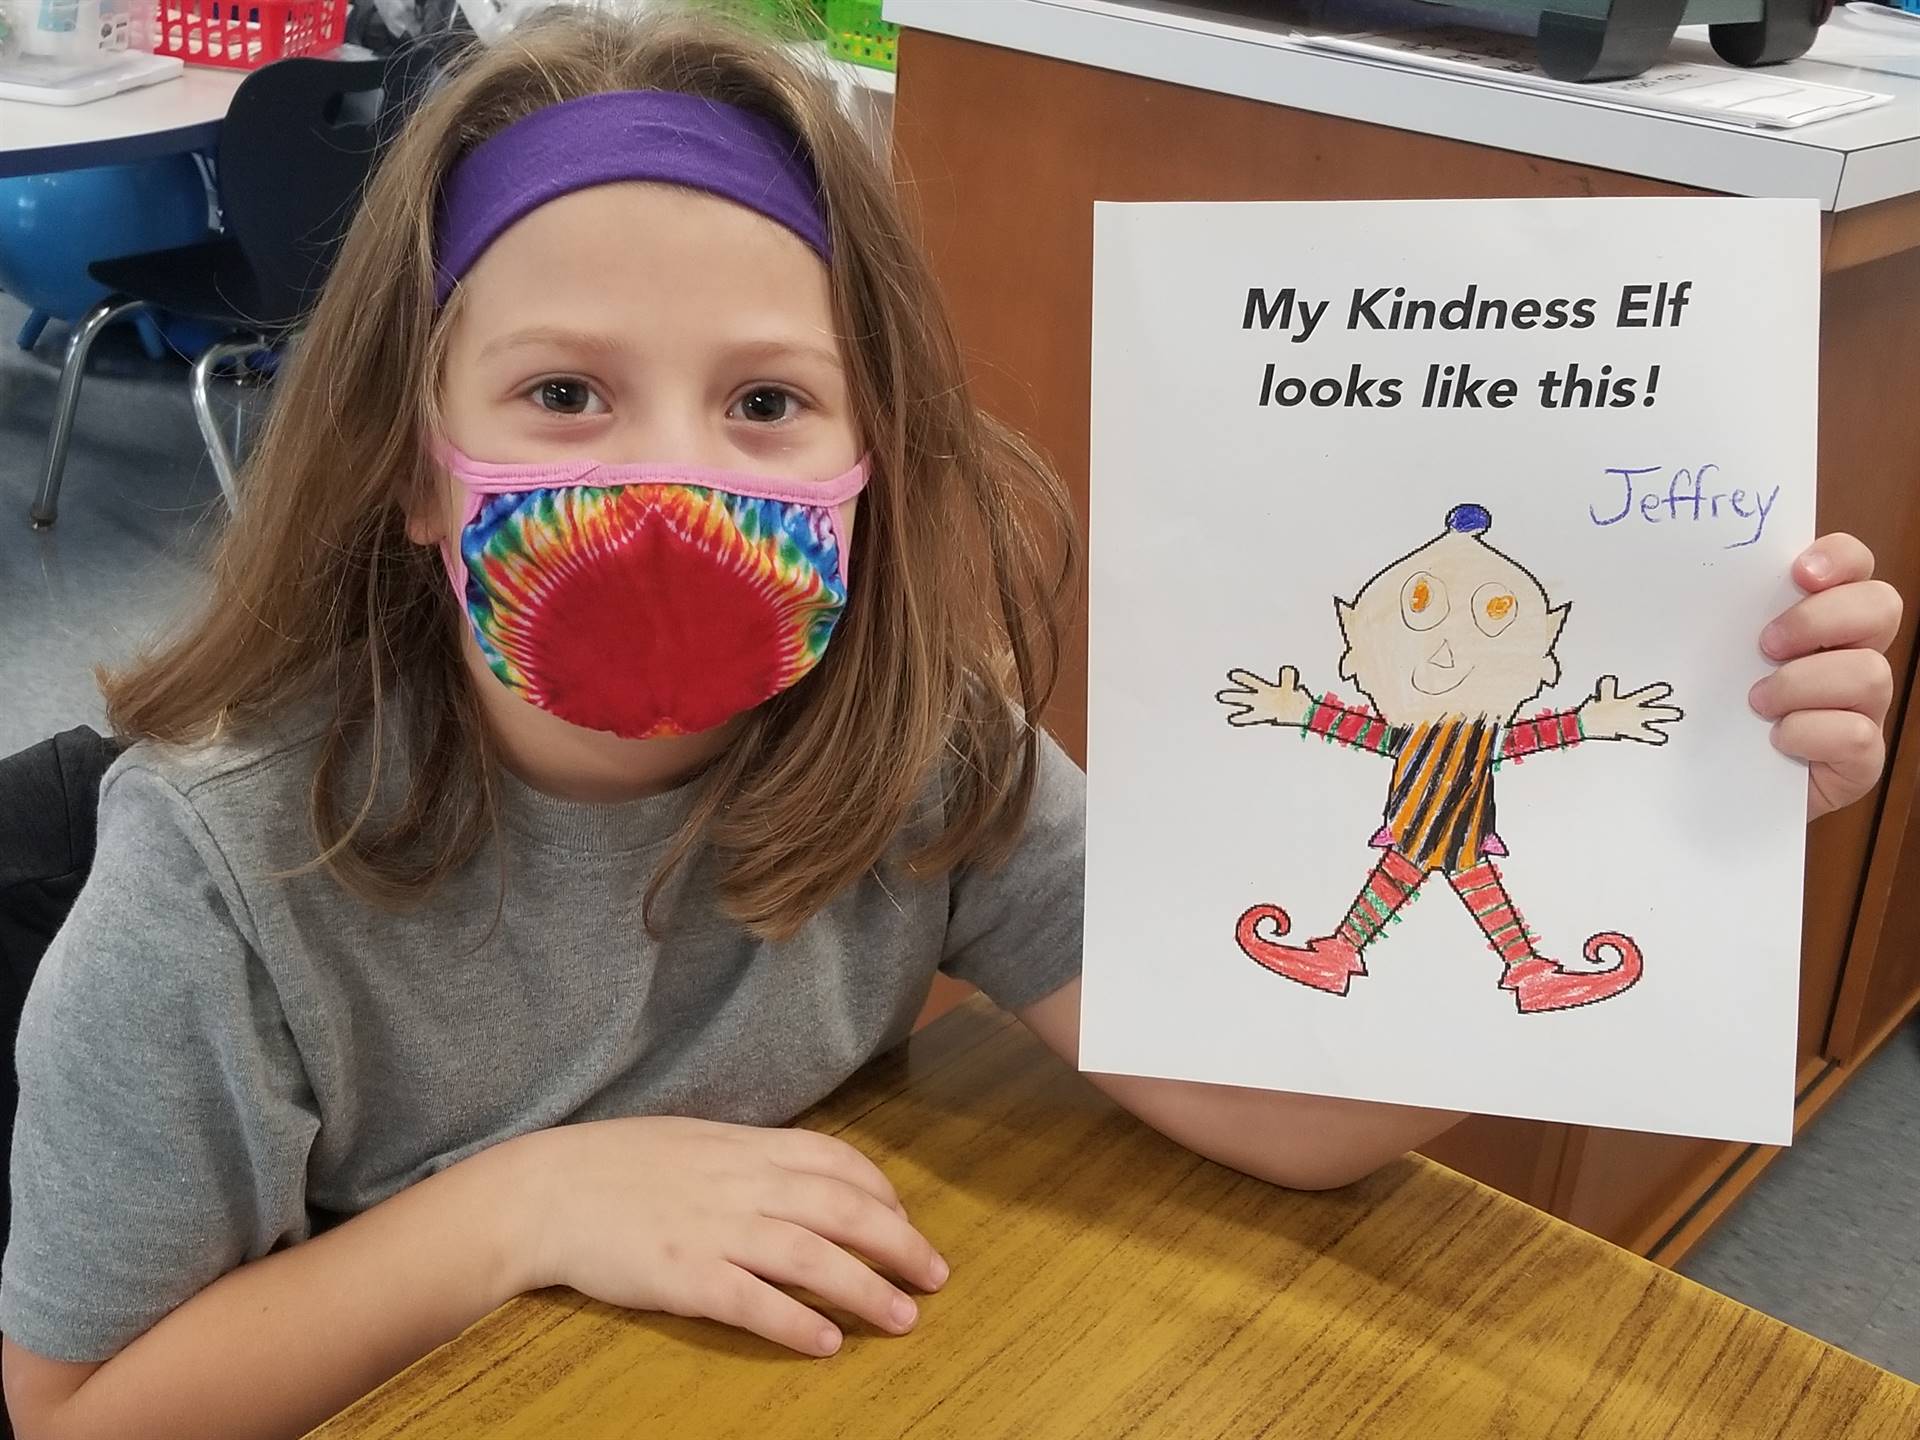 students shows a picture of the kindness elf